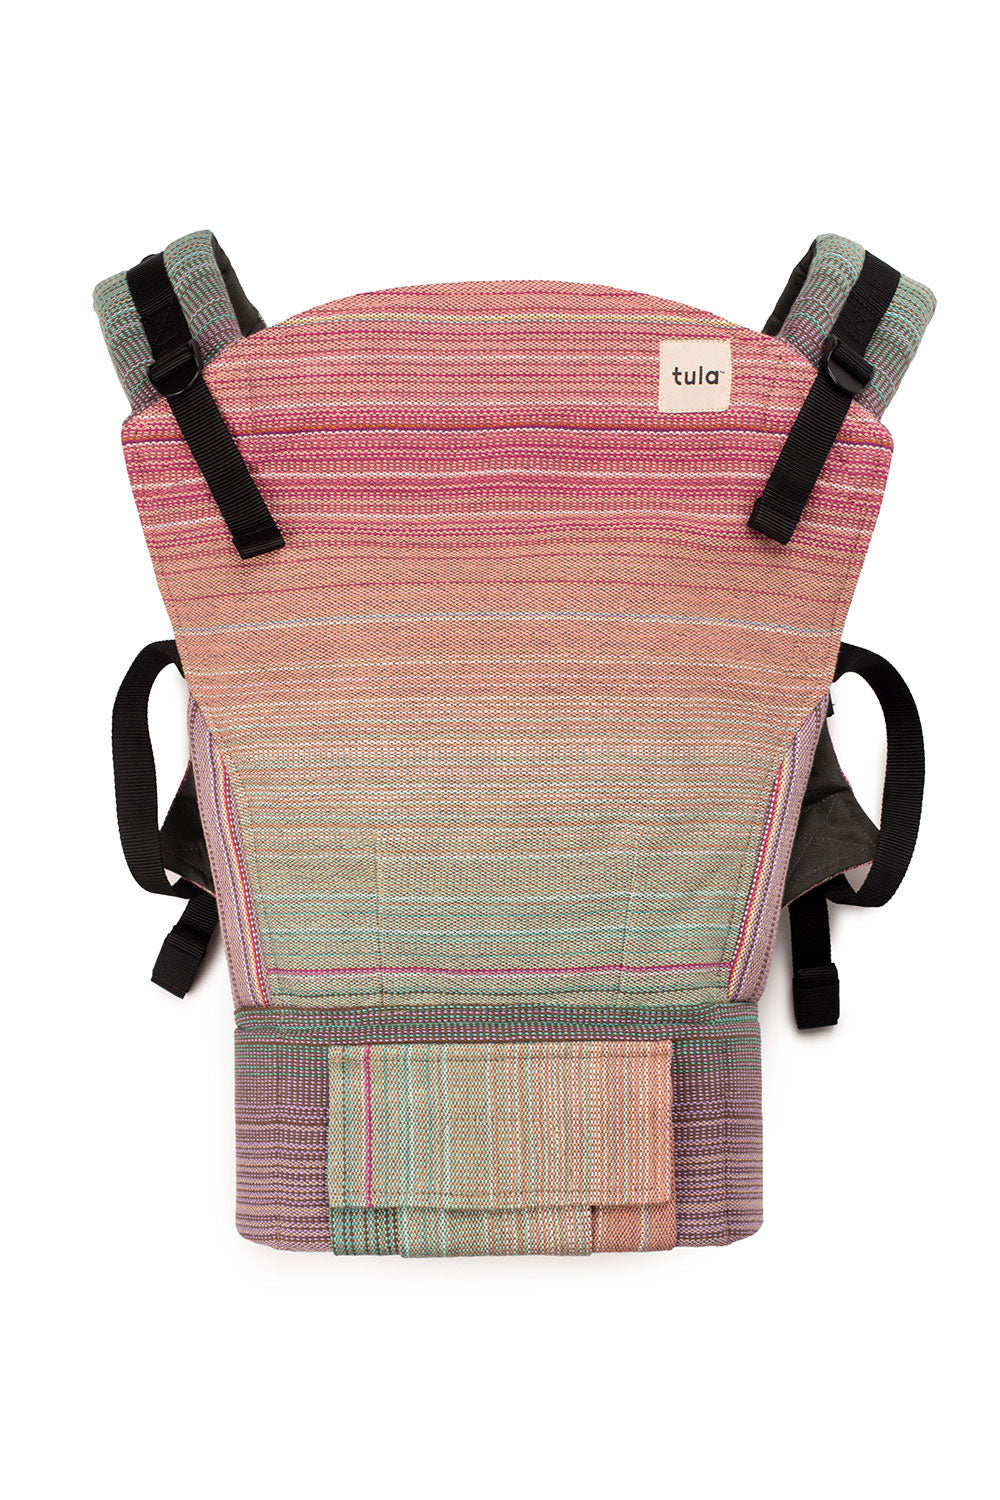 Starry Eyes - Signature Handwoven Standard Baby Carrier